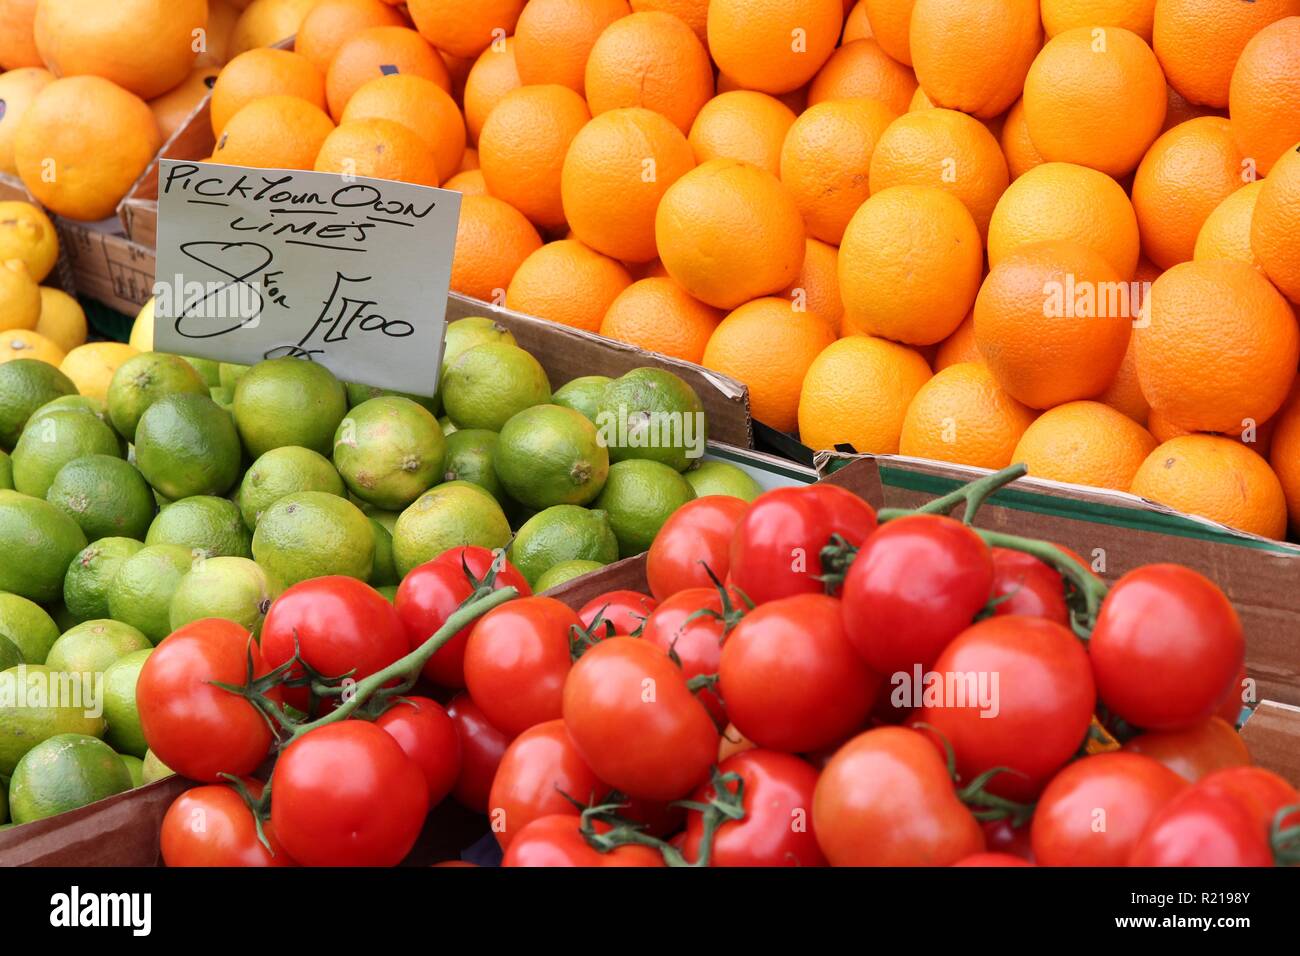 Oranges, limes and tomatoes at a marketplace in United Kingdom. Farmers market. Stock Photo